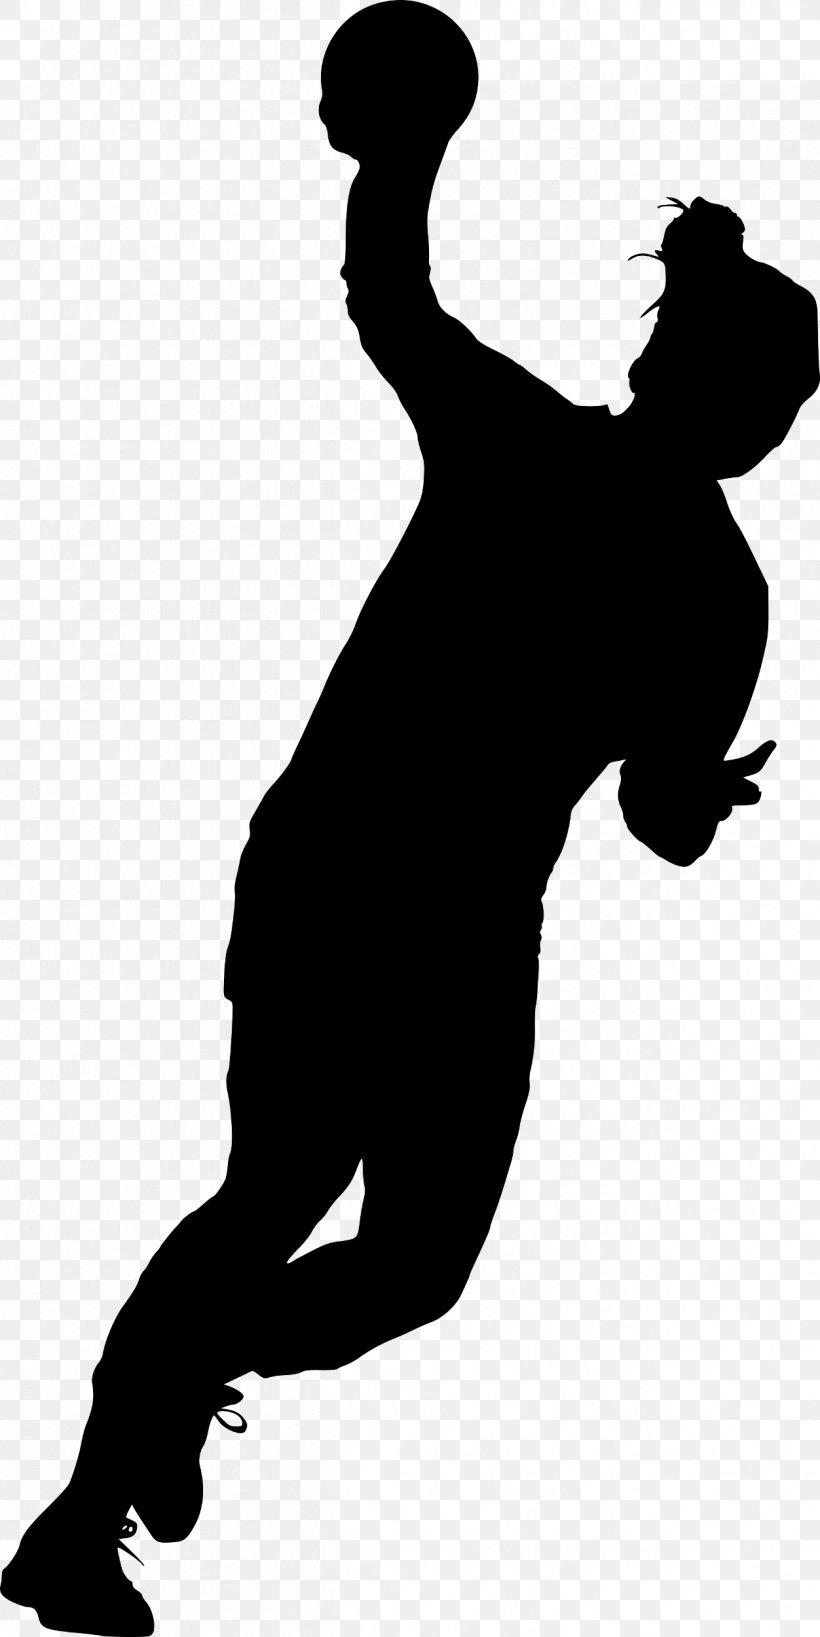 Silhouette Clip Art Photography Image, PNG, 1252x2500px, Silhouette, Handball, Monochrome Photography, Photography, Sports Download Free